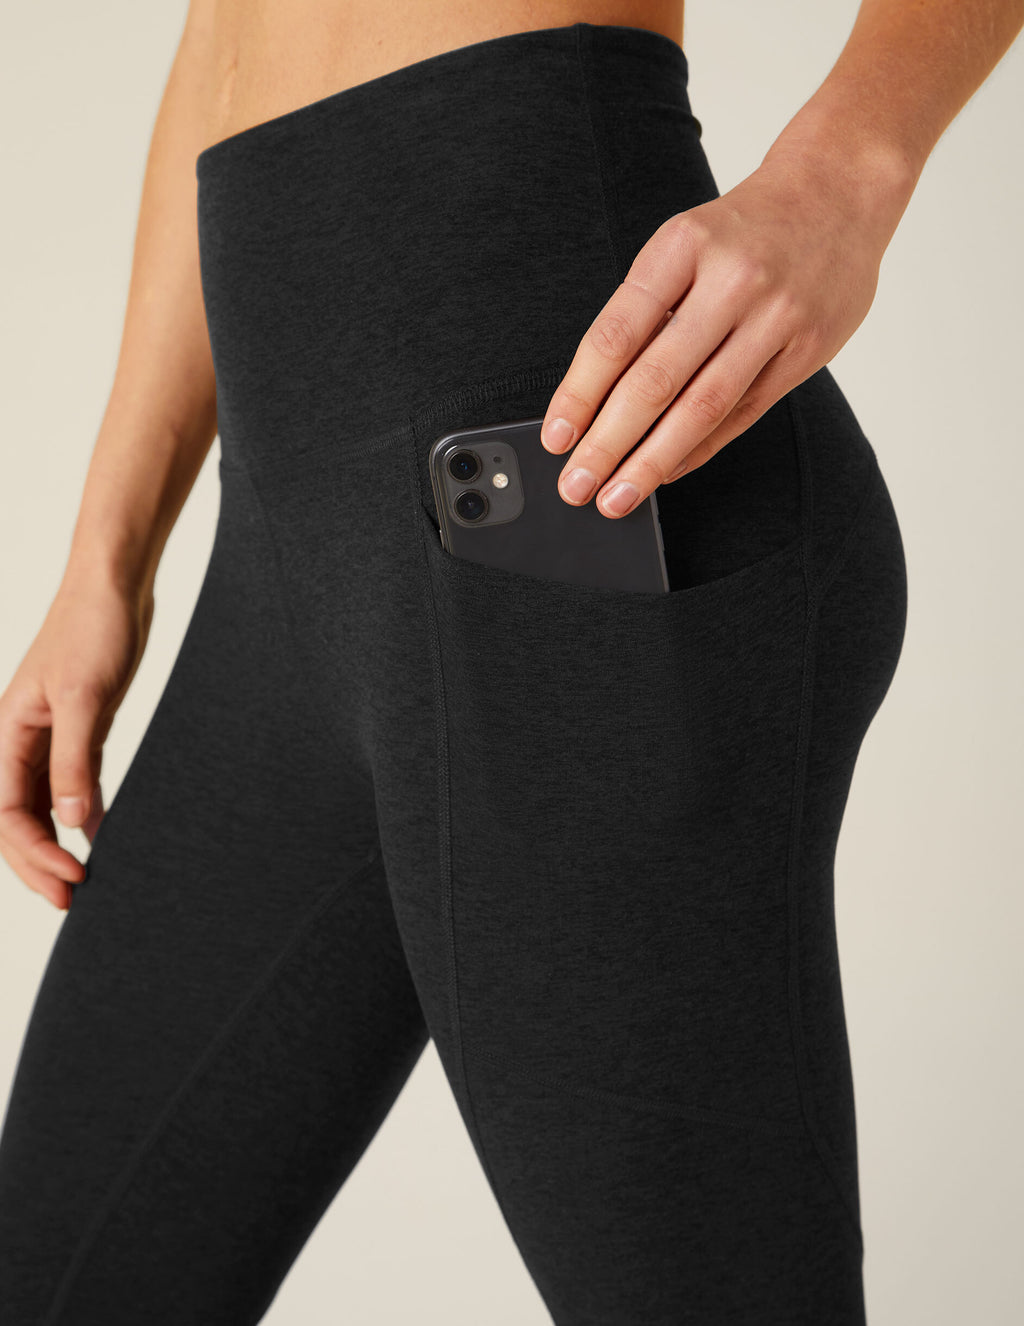 Spacedye Equipped Pocket Midi Legging Featured Image